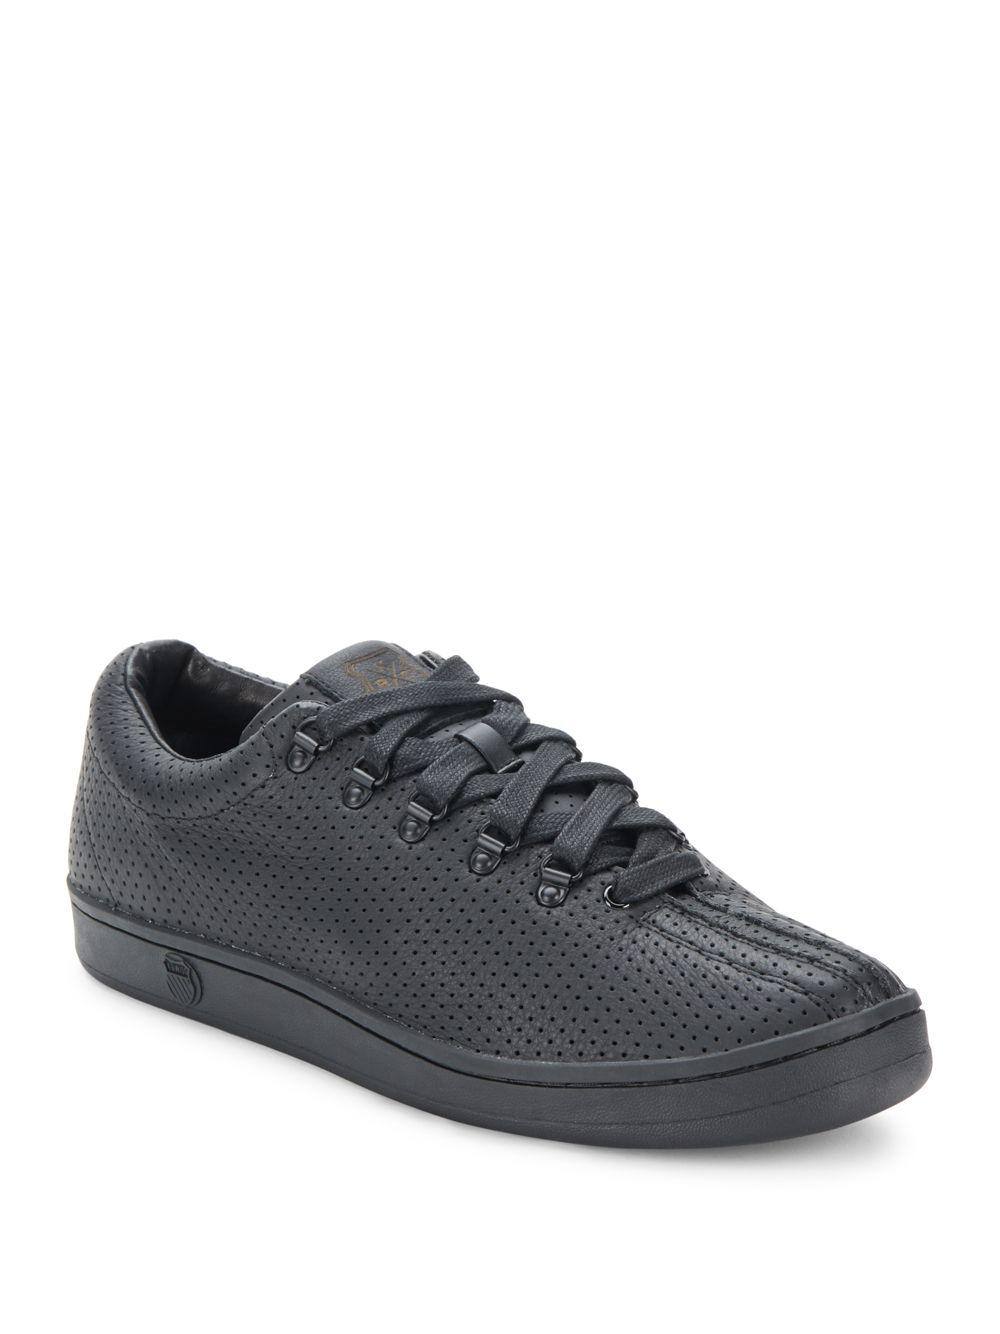 black leather k swiss for Sale,Up To OFF 62%